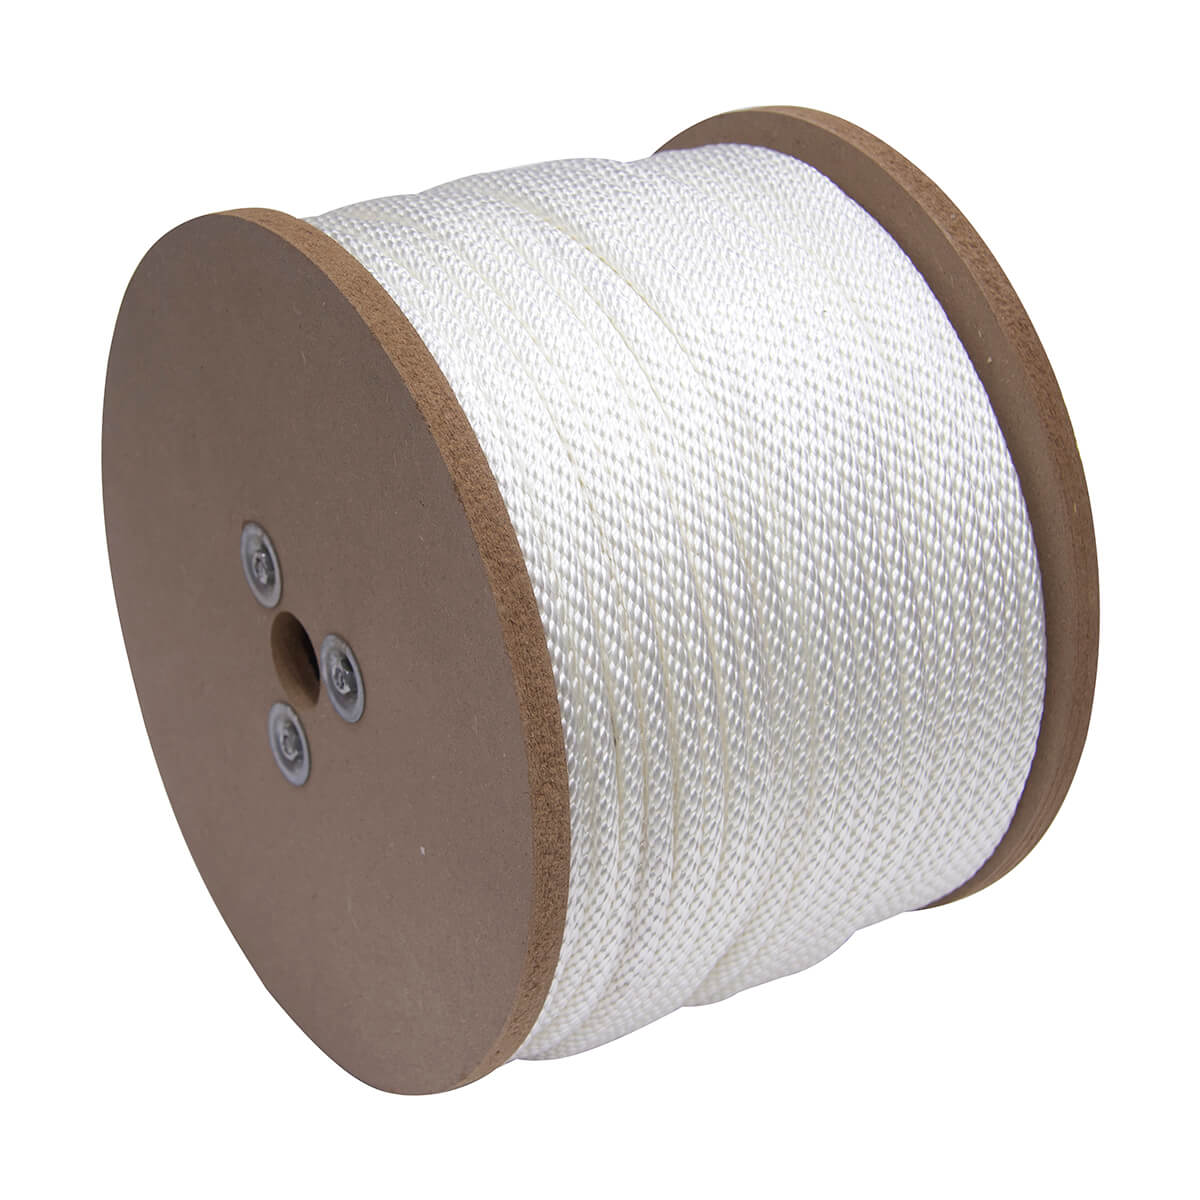 Nylon Smooth Braid Rope - 5/16-in - Price Per ft